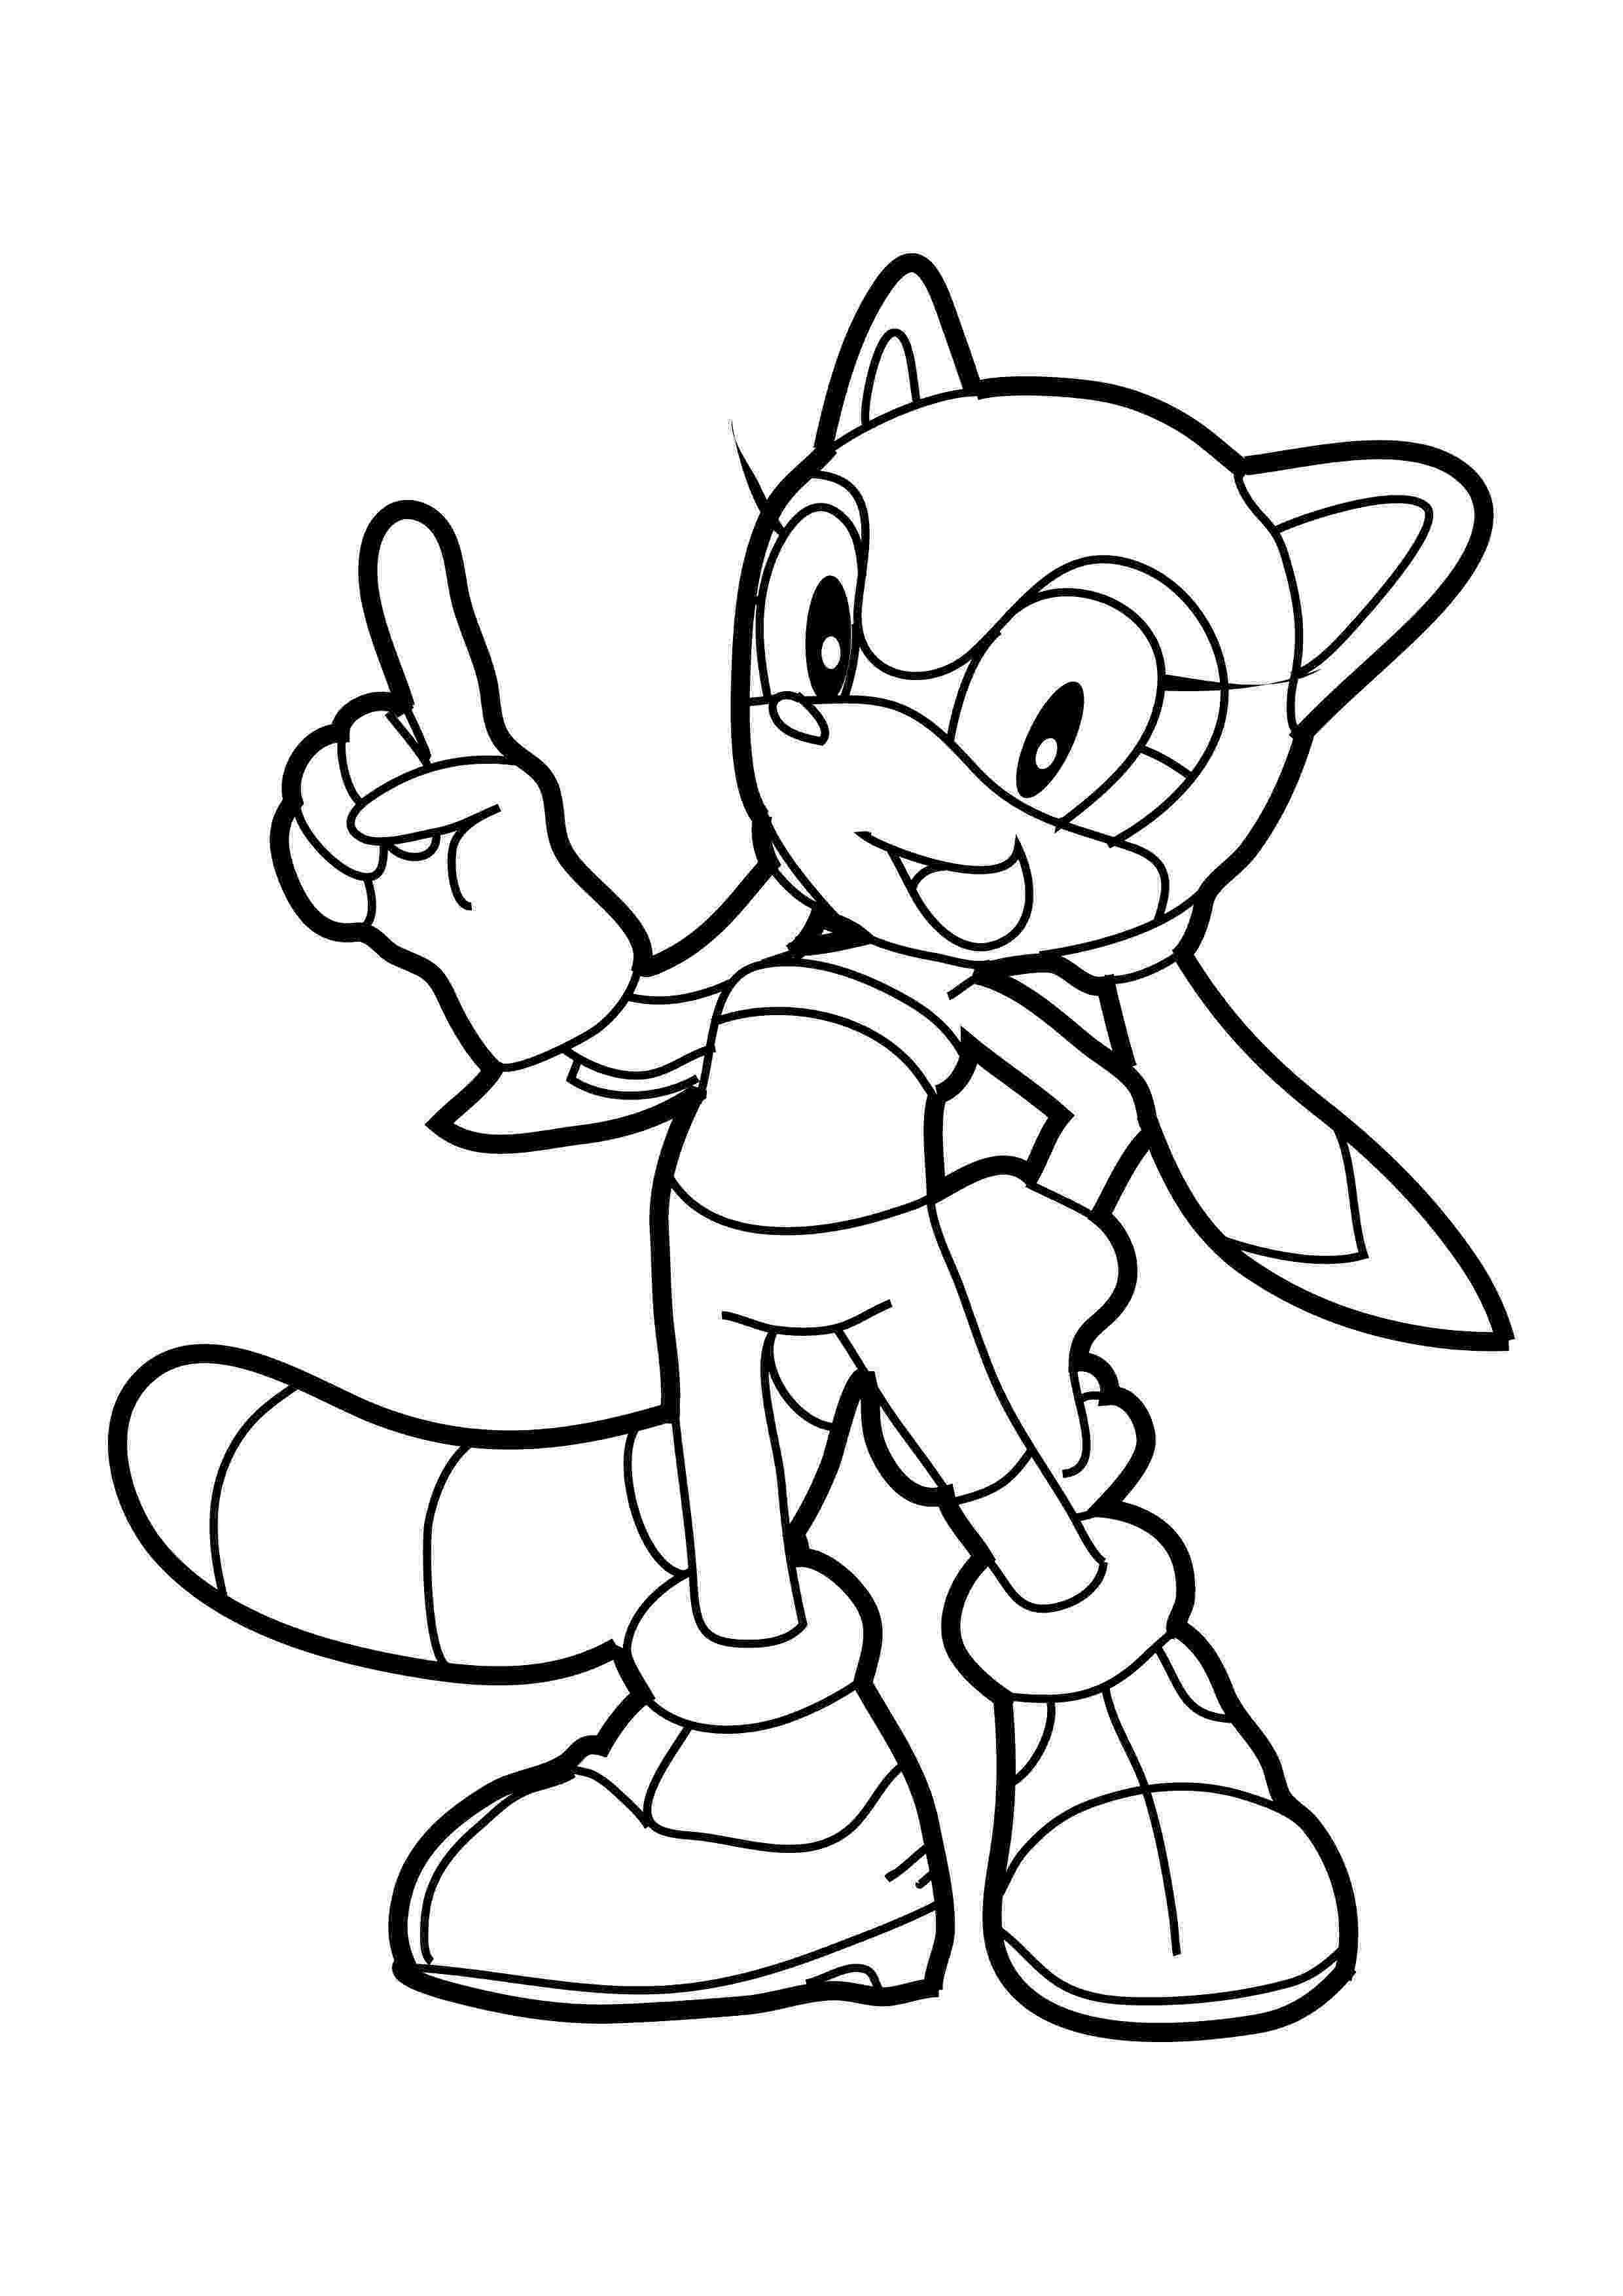 sonic amy coloring pages sonic and amy by theevafan on deviantart pages coloring sonic amy 